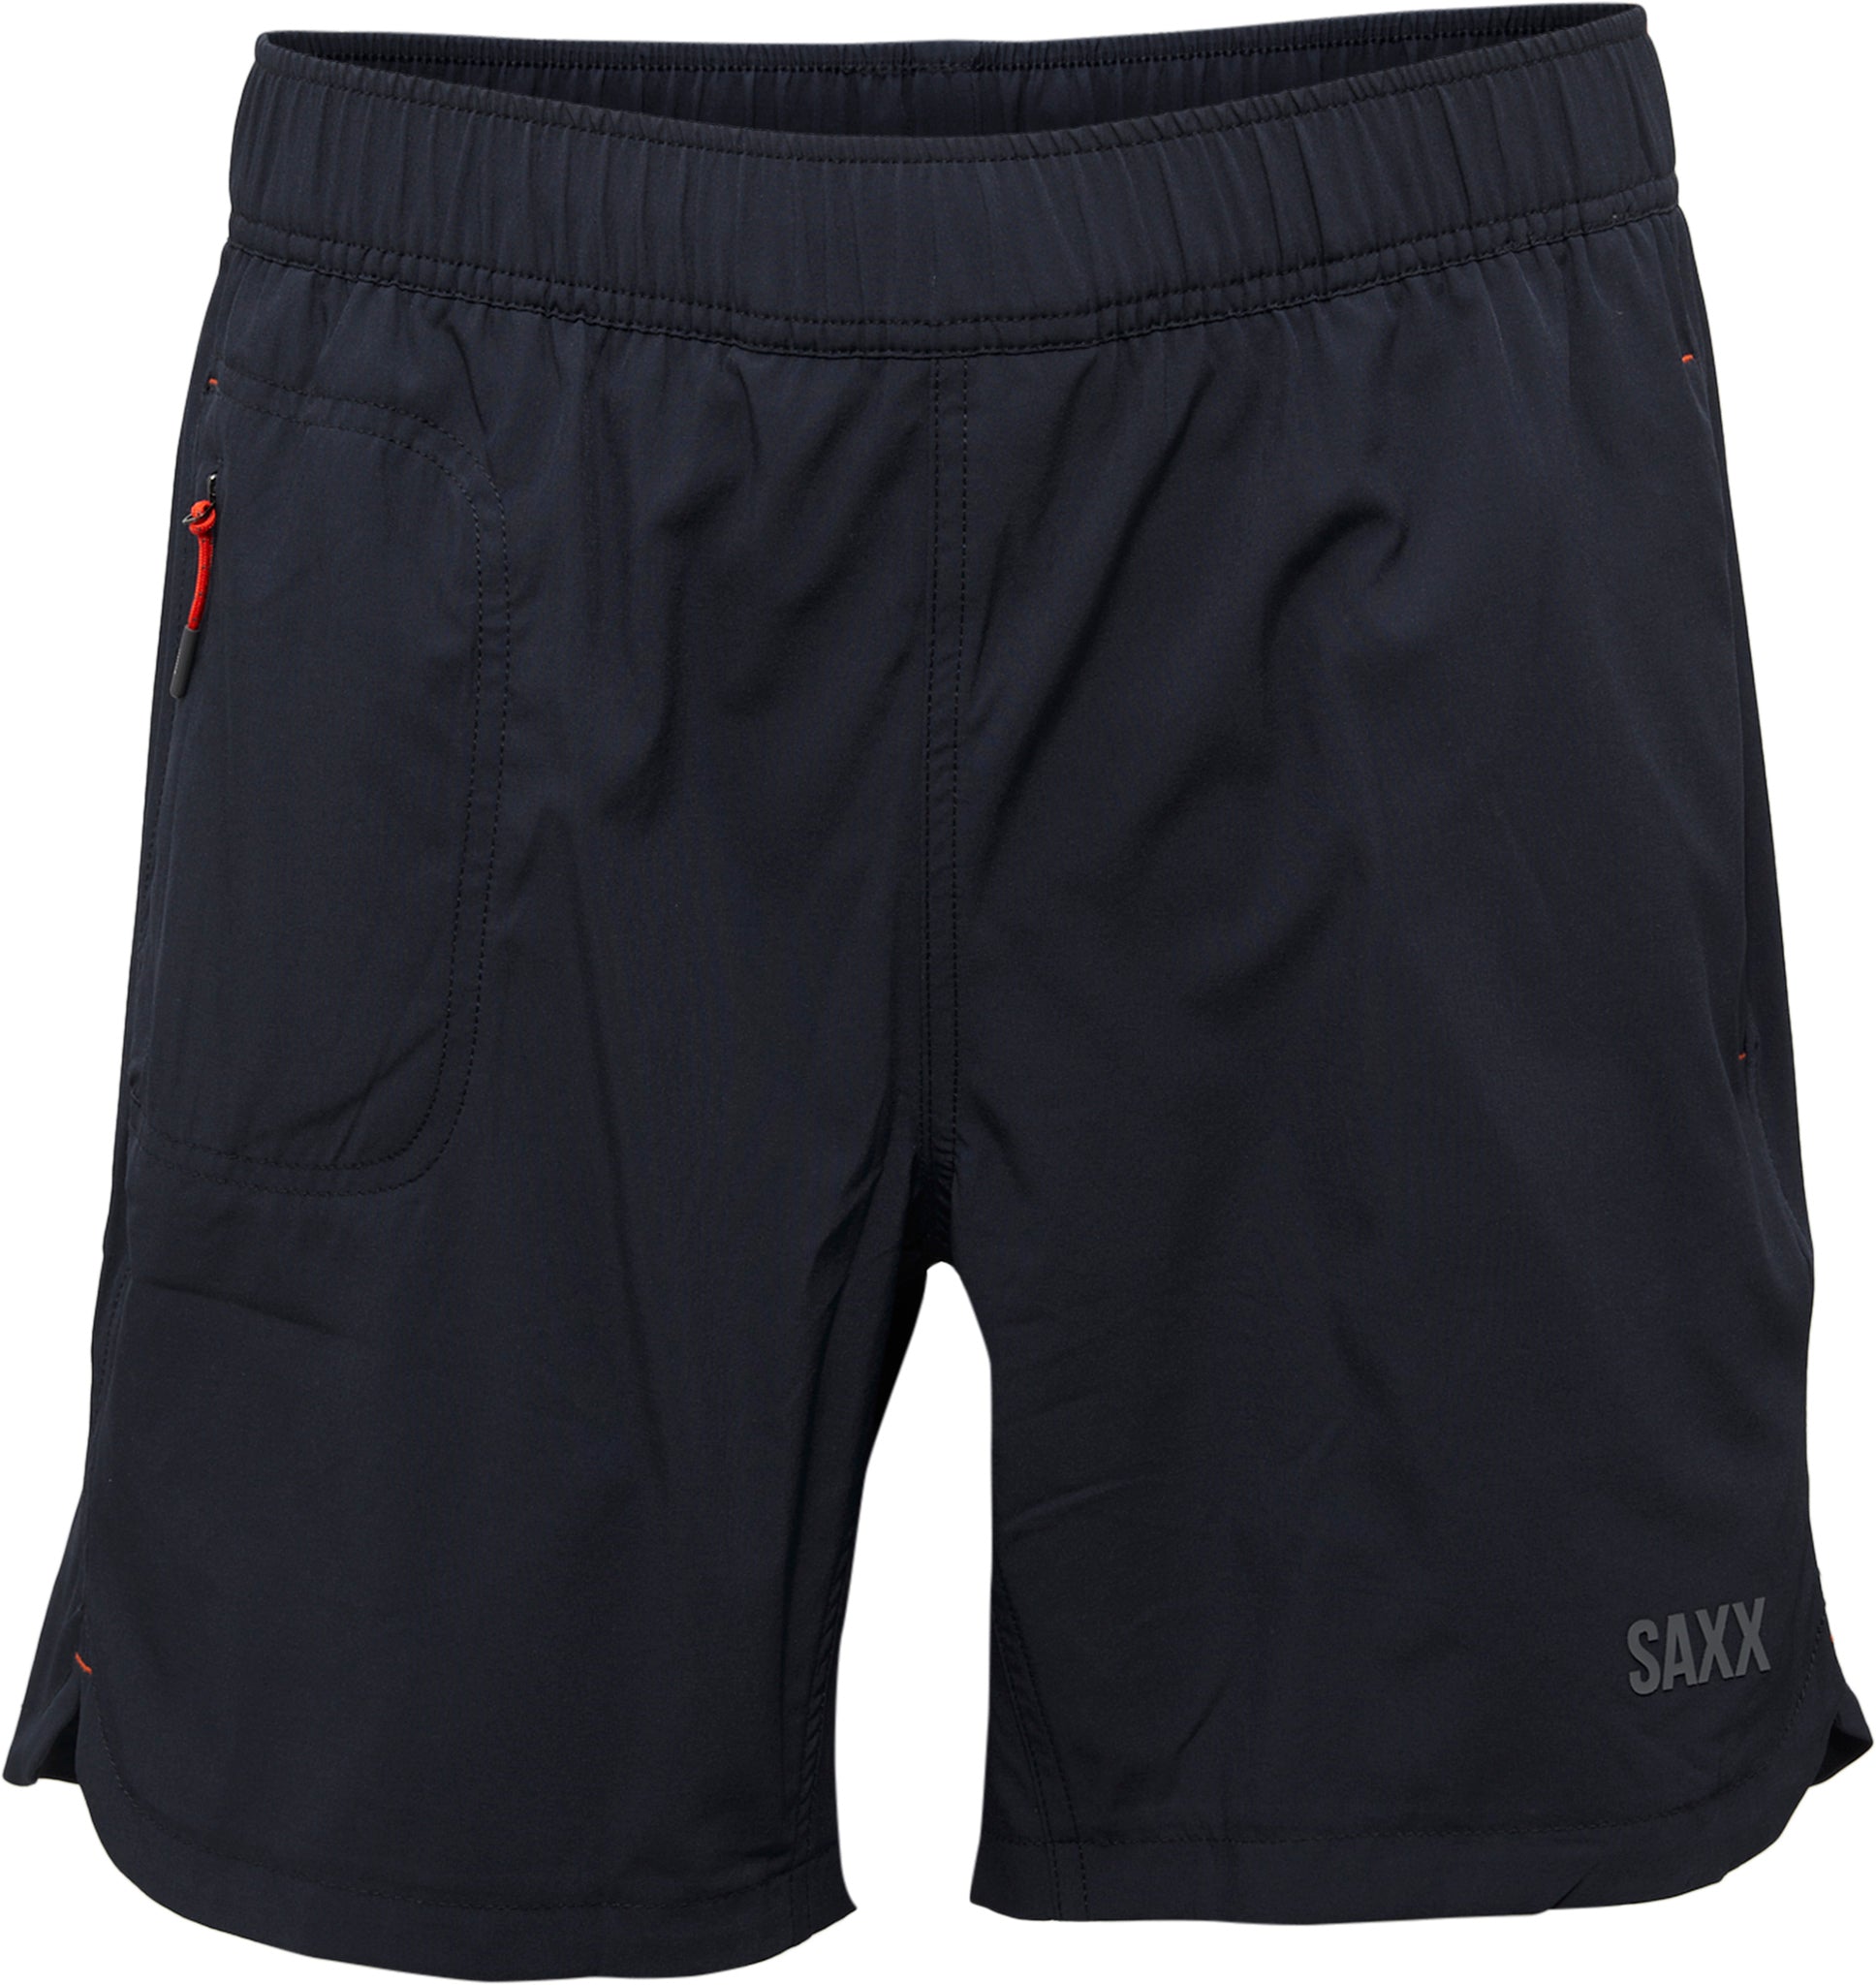 Momentum 7 Inch Shorts - No Liner - Bucked Up